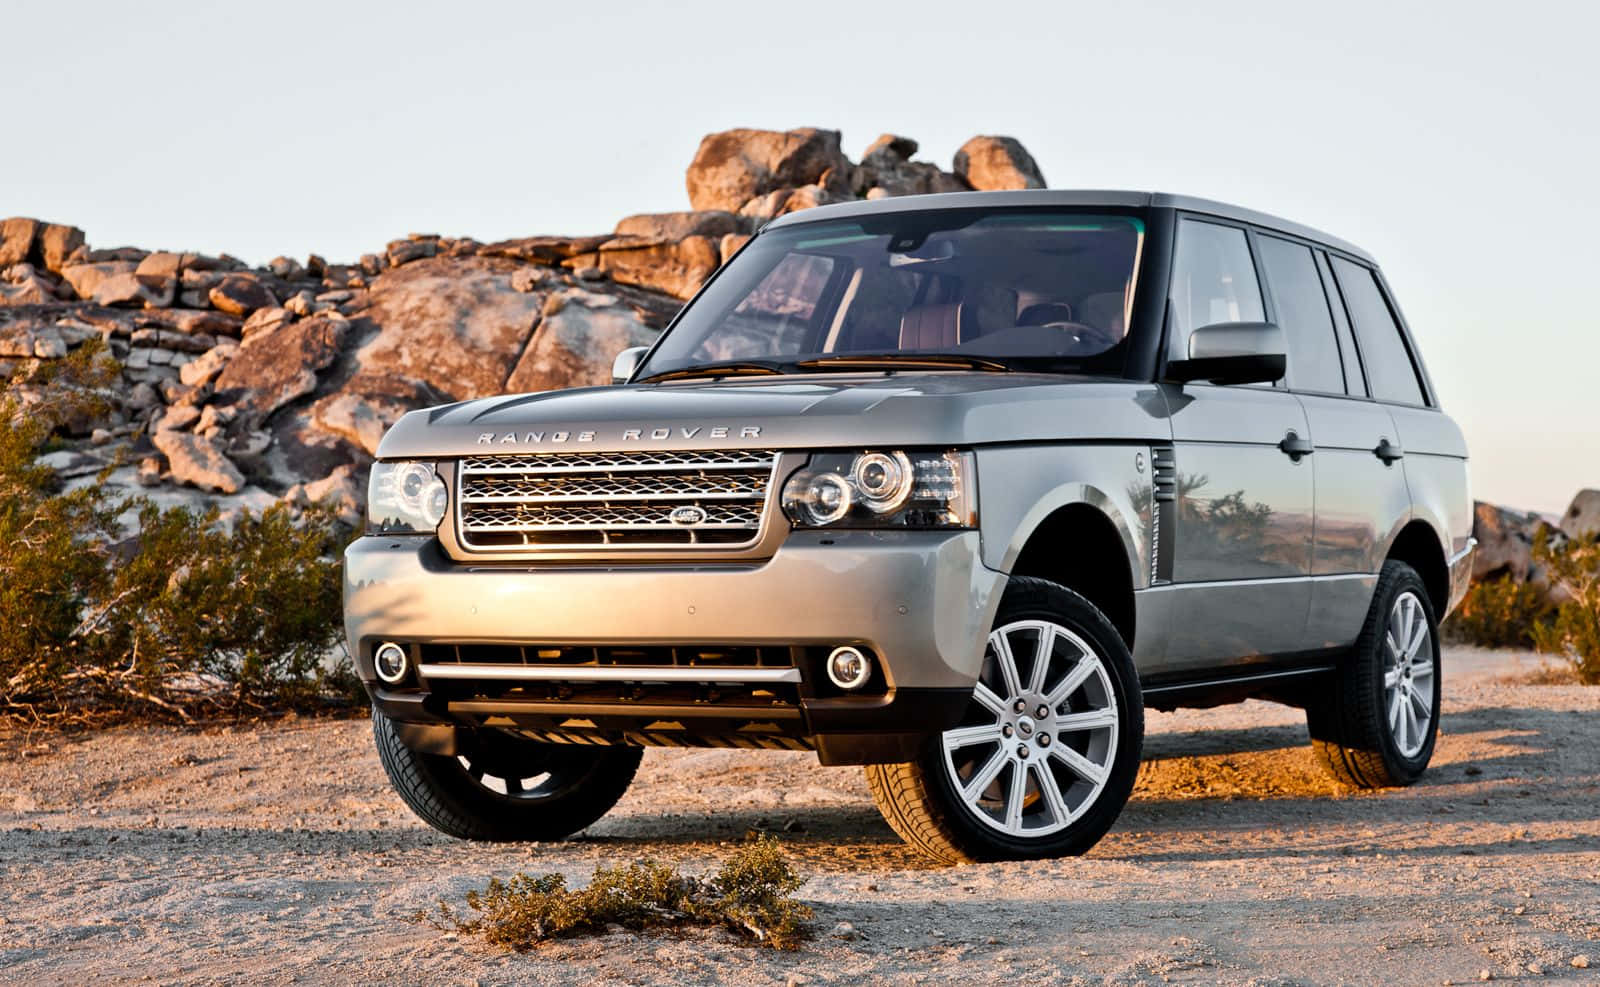 An extravagant visual experience to behold – Step into the luxury of a Range Rover